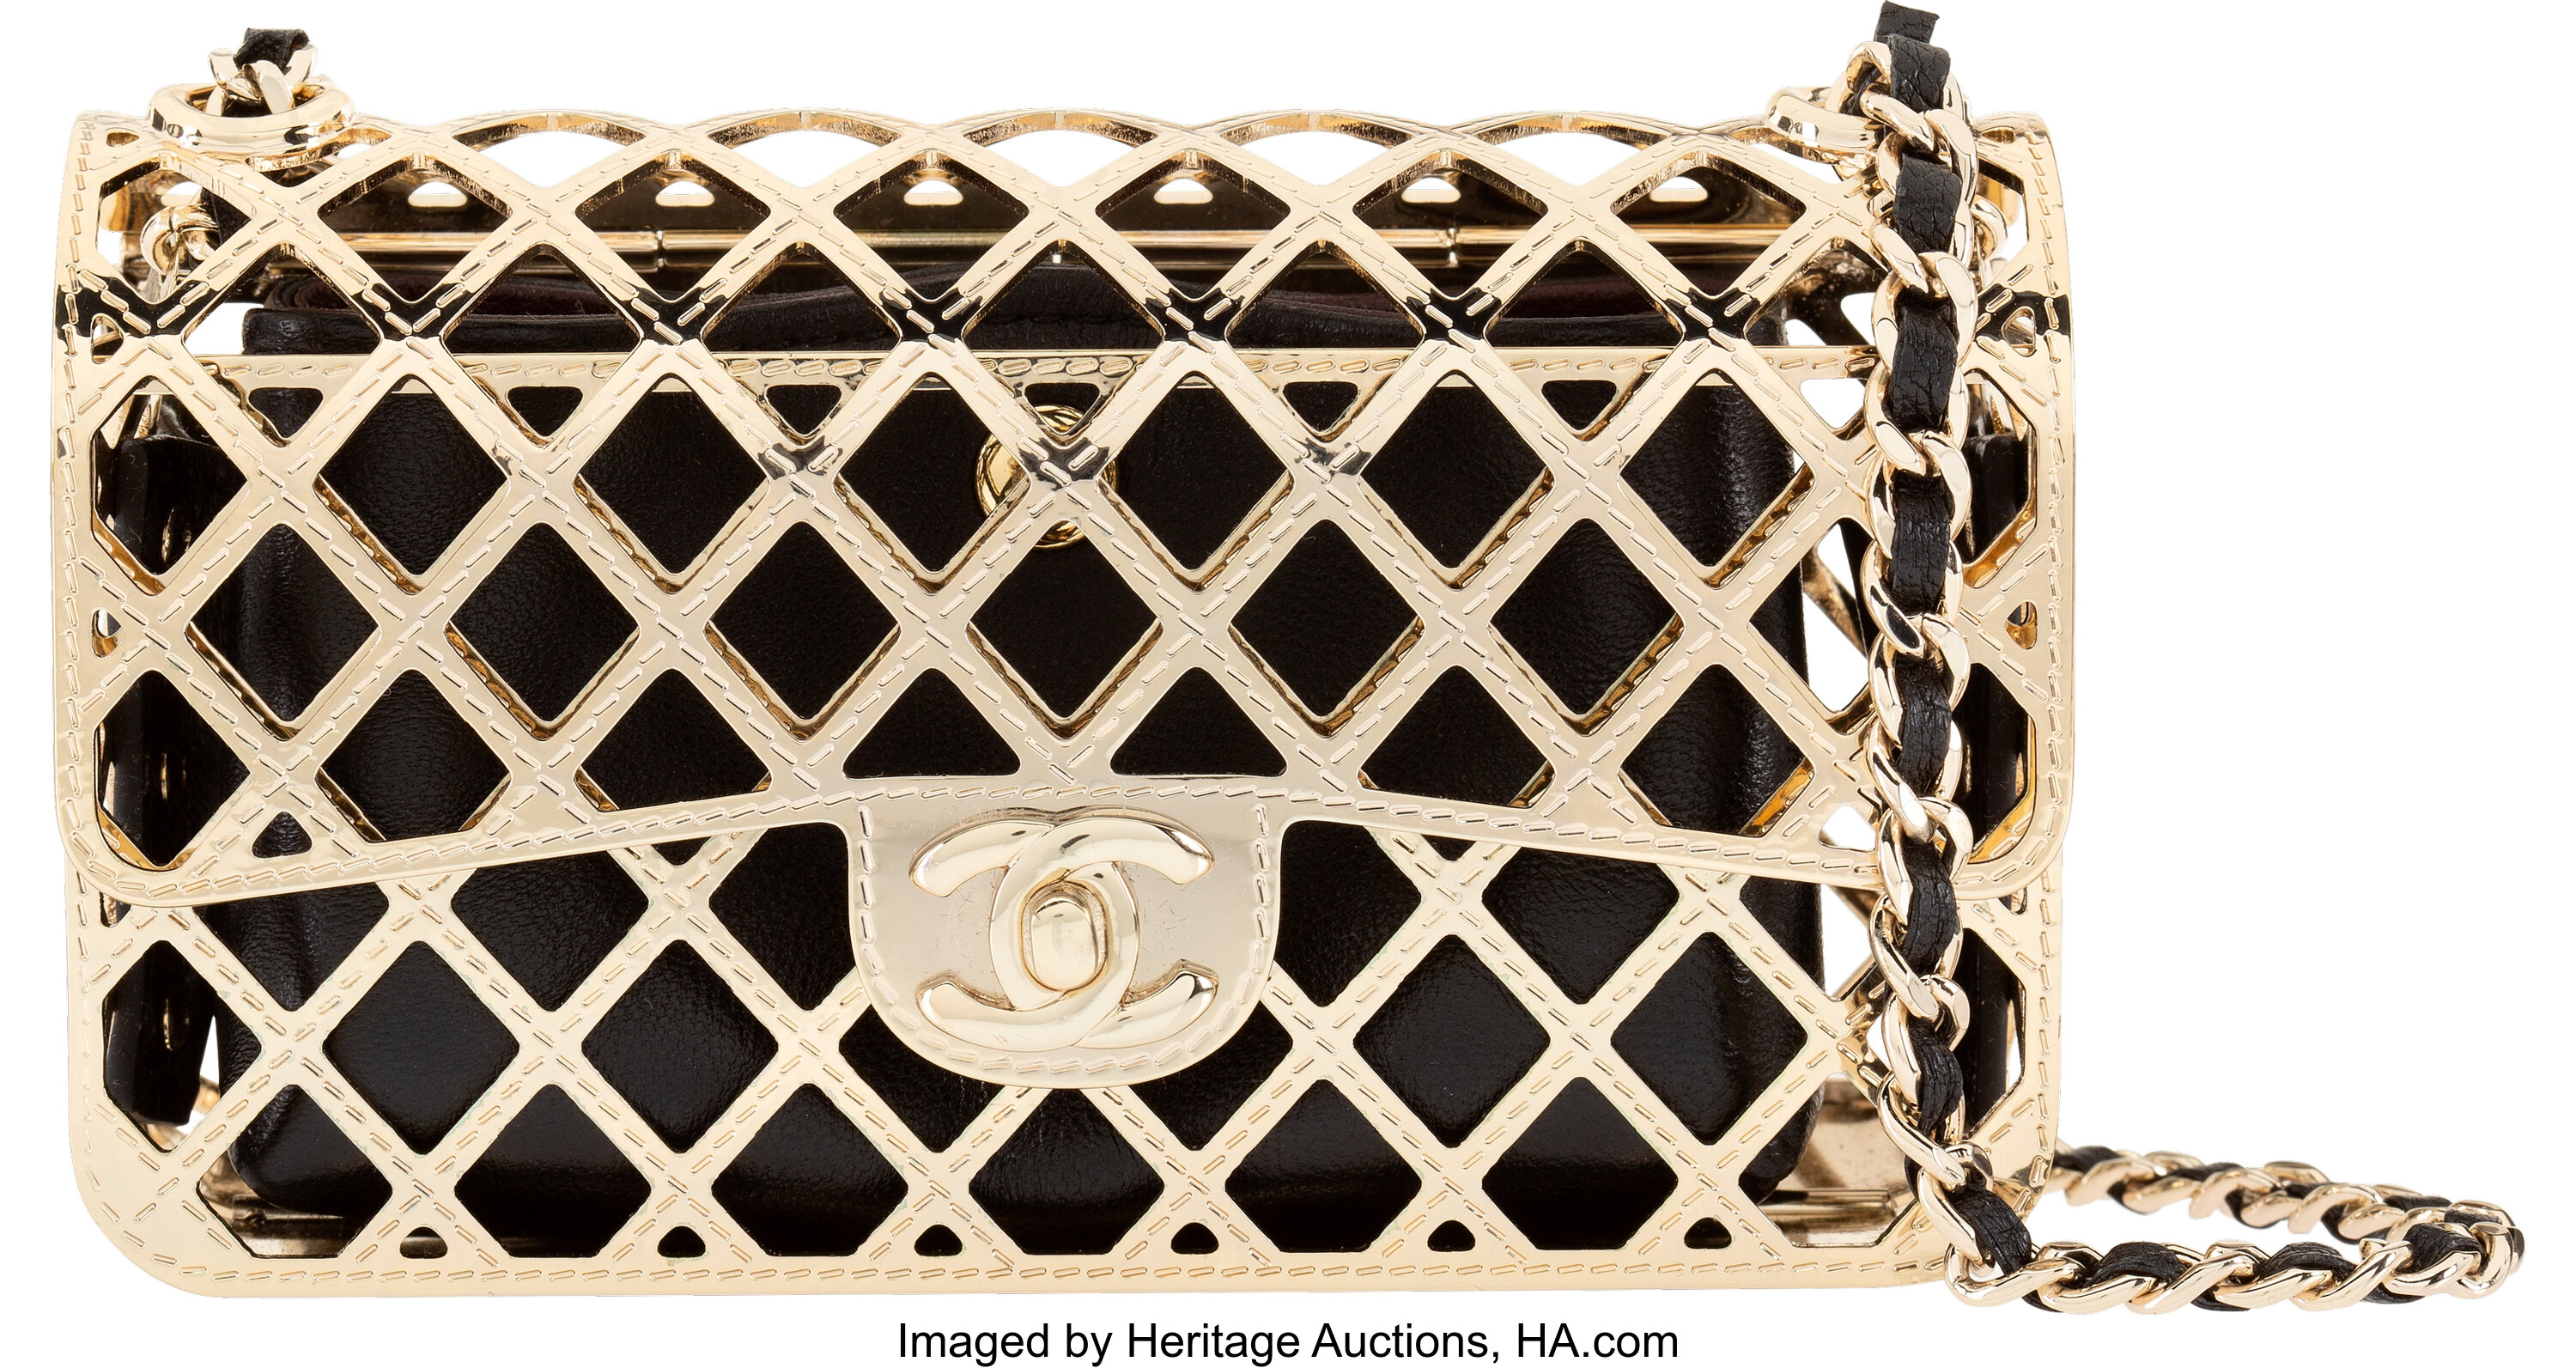 Chanel Gold-Tone Metal Mini Cage Flap Bag. Condition: 1. 5